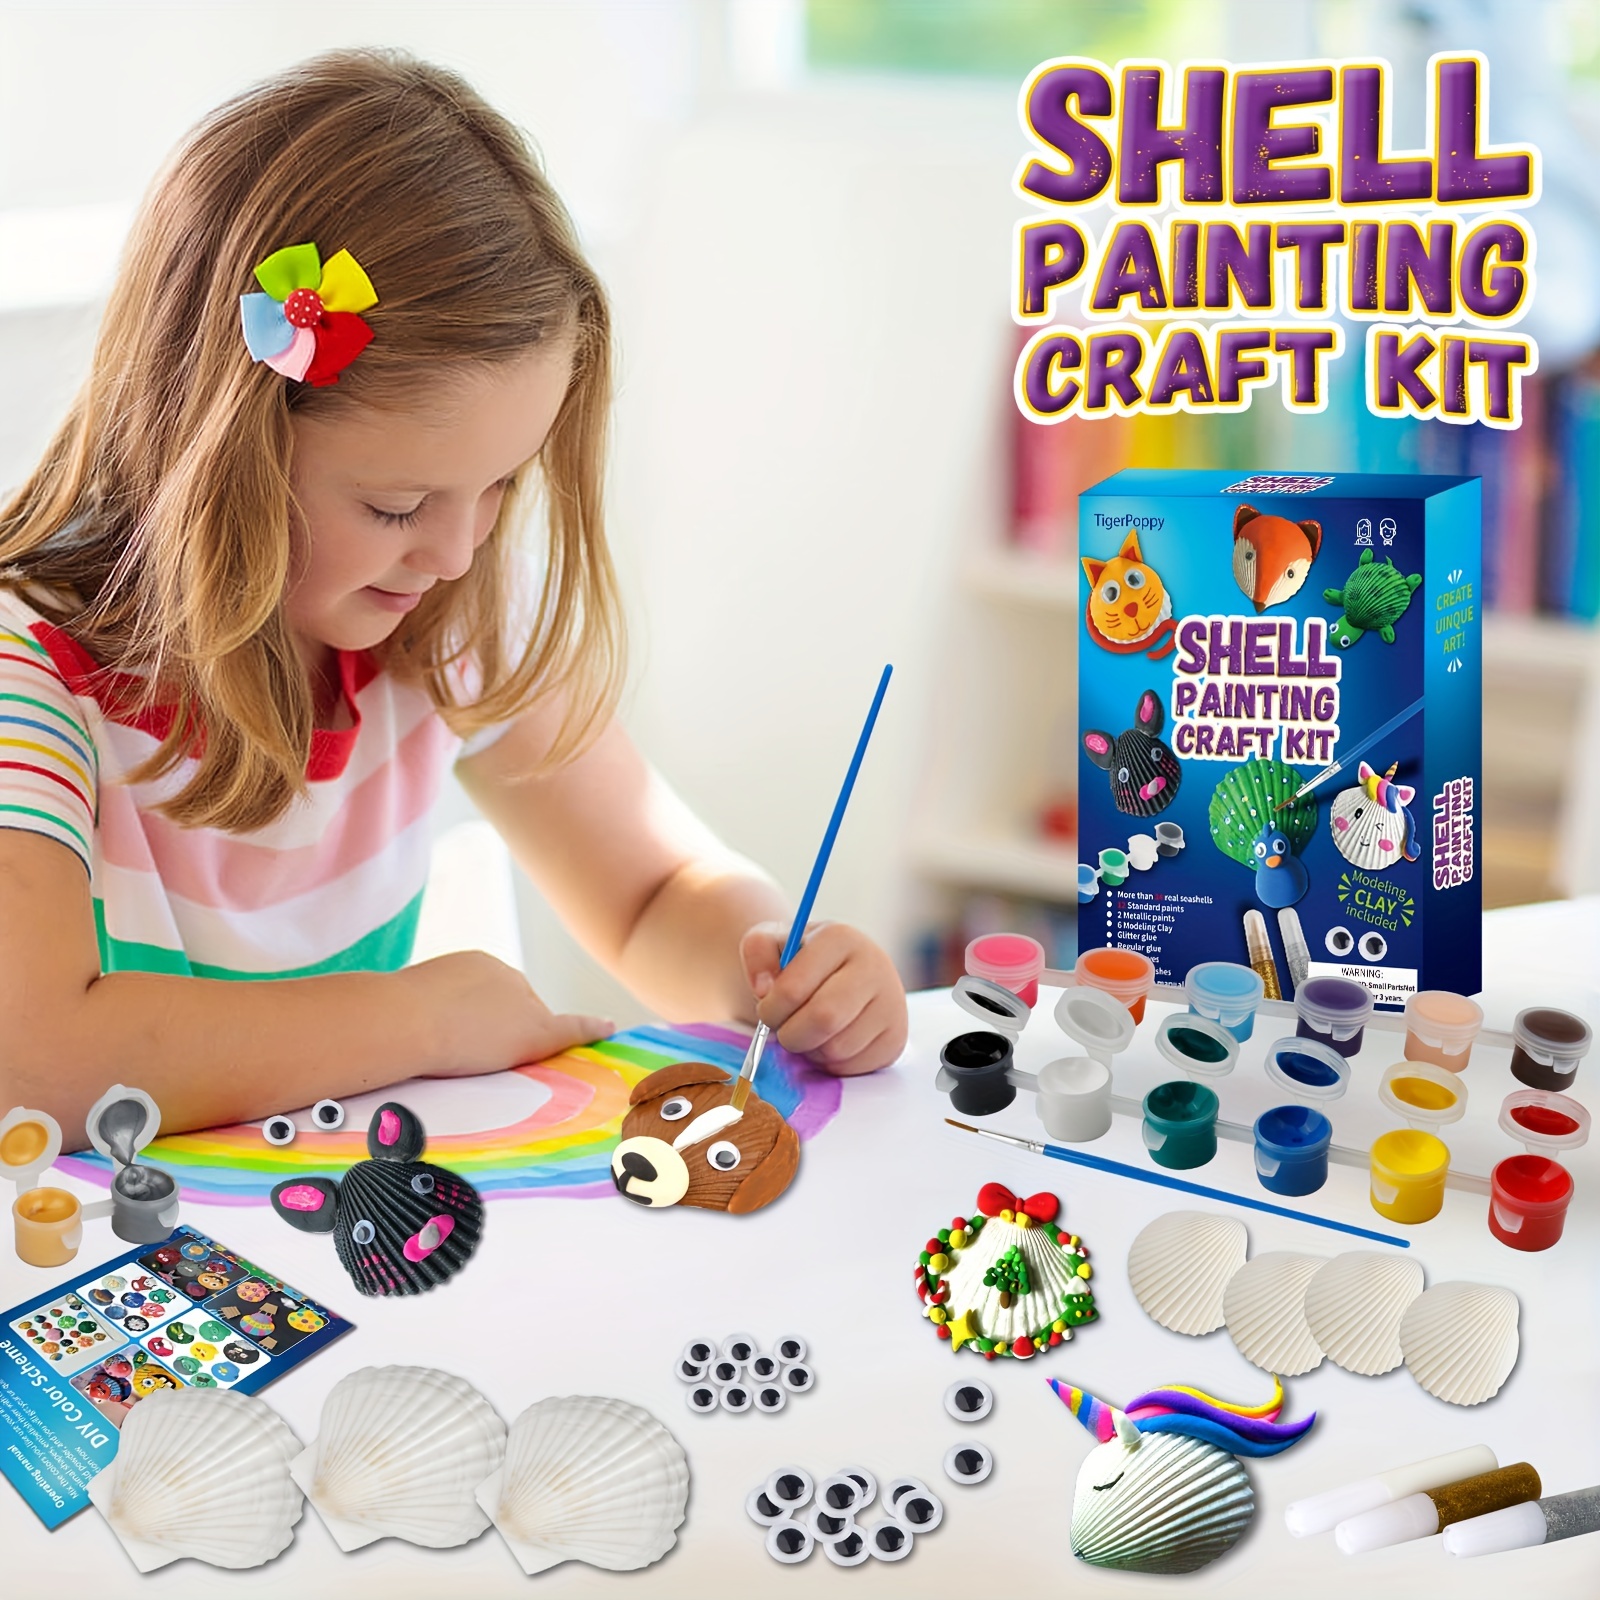 Art Supplies & Kits for 6 Year Olds